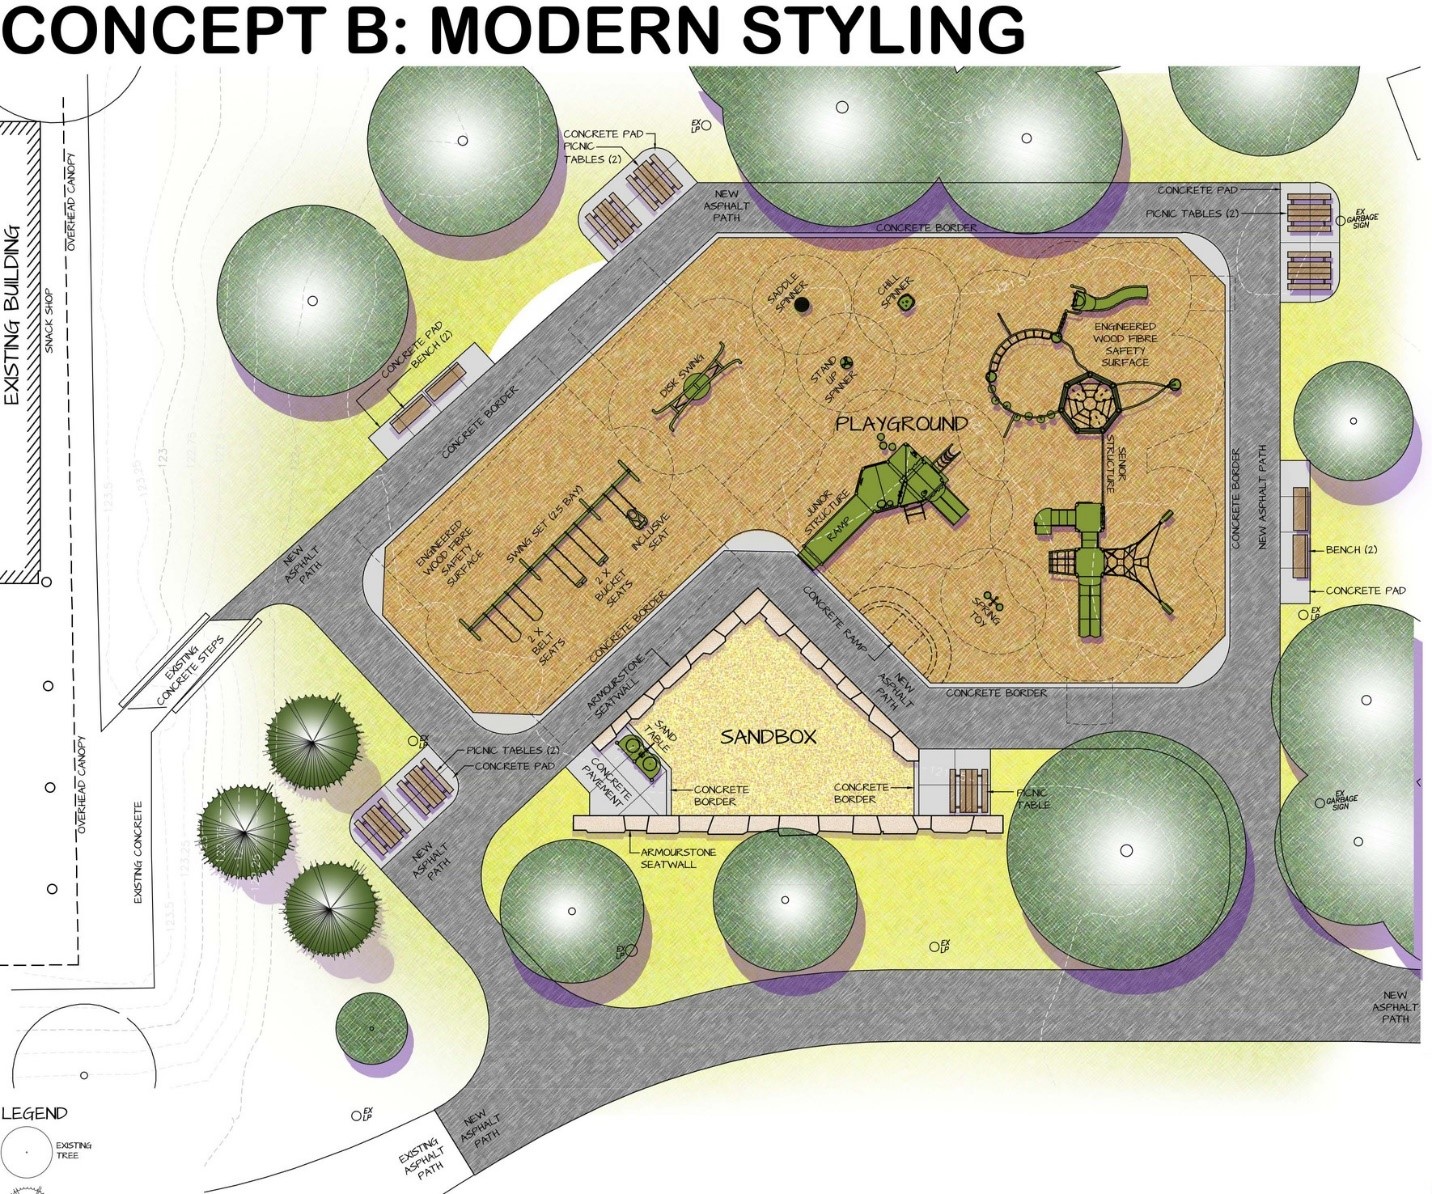 A rendering of playground Design A for the Stand Wadlow Park Playground improvements. Playground Design B illustrates all new play equipment, including a junior play structure with an accessible ramp, and a senior play structure with obstacle course type play elements. Playground Design B illustrates a large new sand play area with a small shade shelter and an accessible sand table.